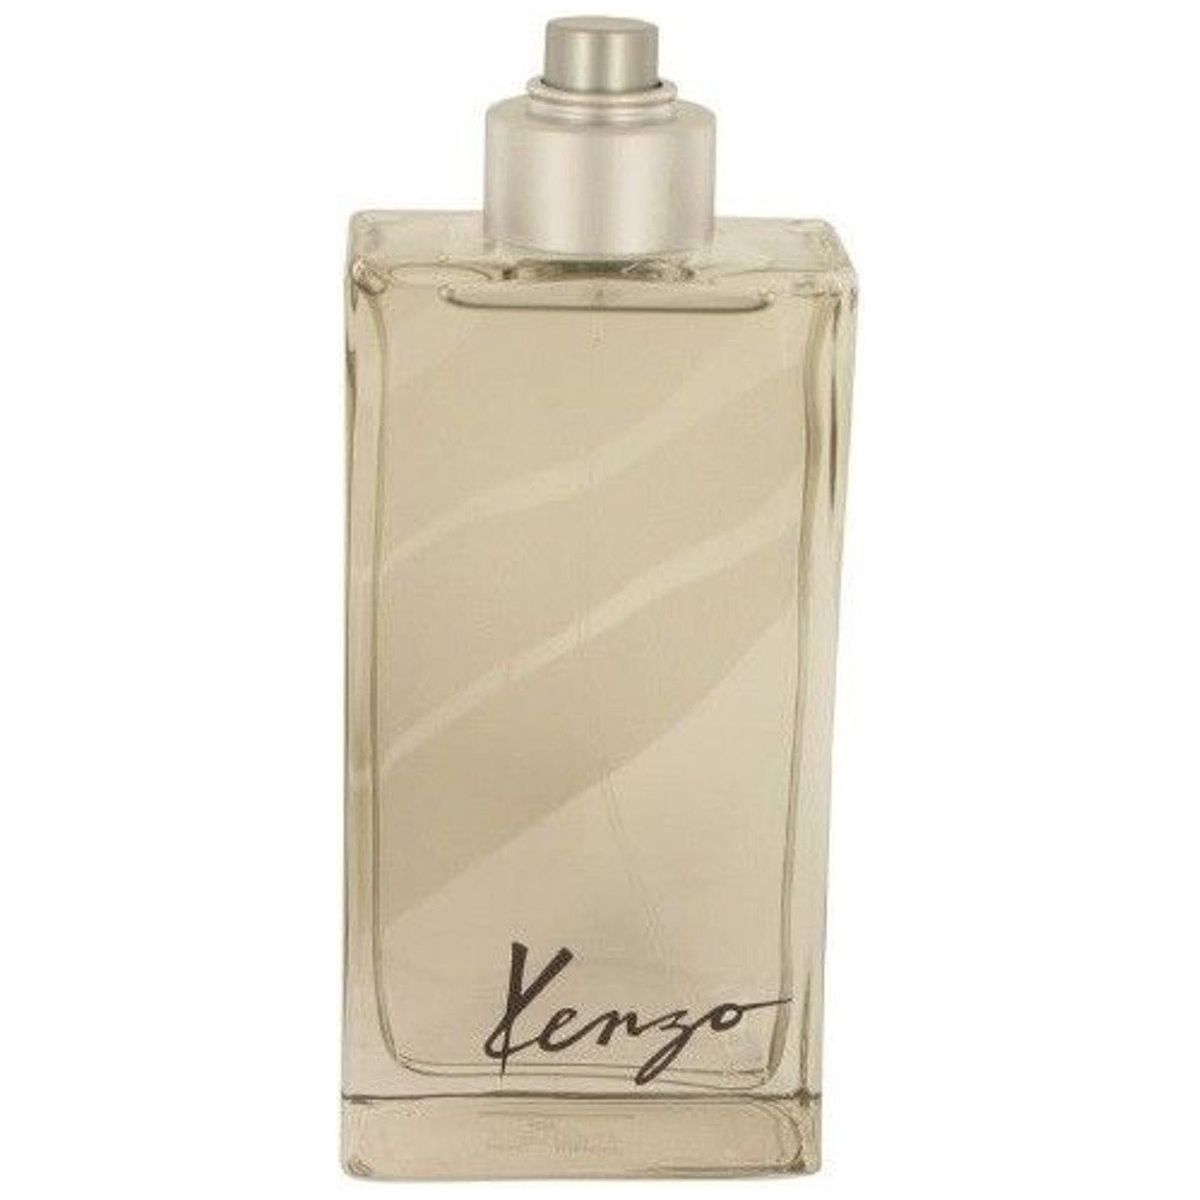 JUNGLE by 3.3 3.4 EDT oz men for / cologne Kenzo Tester New